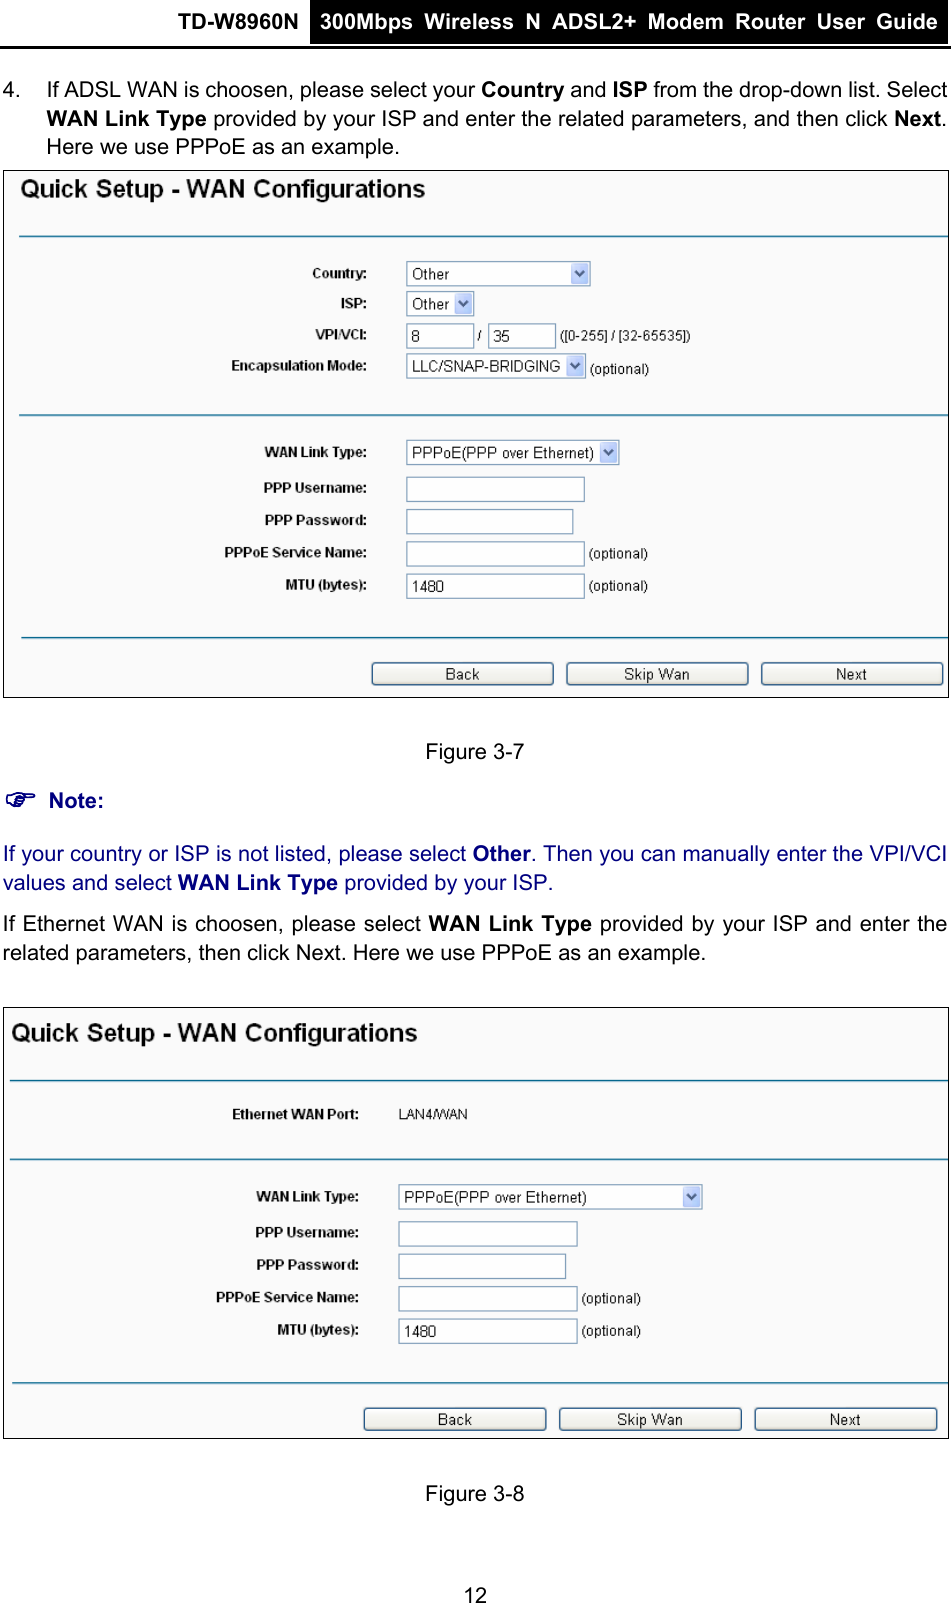 TD-W8960N  300Mbps Wireless N ADSL2+ Modem Router User Guide  4.  If ADSL WAN is choosen, please select your Country and ISP from the drop-down list. Select WAN Link Type provided by your ISP and enter the related parameters, and then click Next. Here we use PPPoE as an example.  Figure 3-7  Note: If your country or ISP is not listed, please select Other. Then you can manually enter the VPI/VCI values and select WAN Link Type provided by your ISP. If Ethernet WAN is choosen, please select WAN Link Type provided by your ISP and enter the related parameters, then click Next. Here we use PPPoE as an example.  Figure 3-8 12 